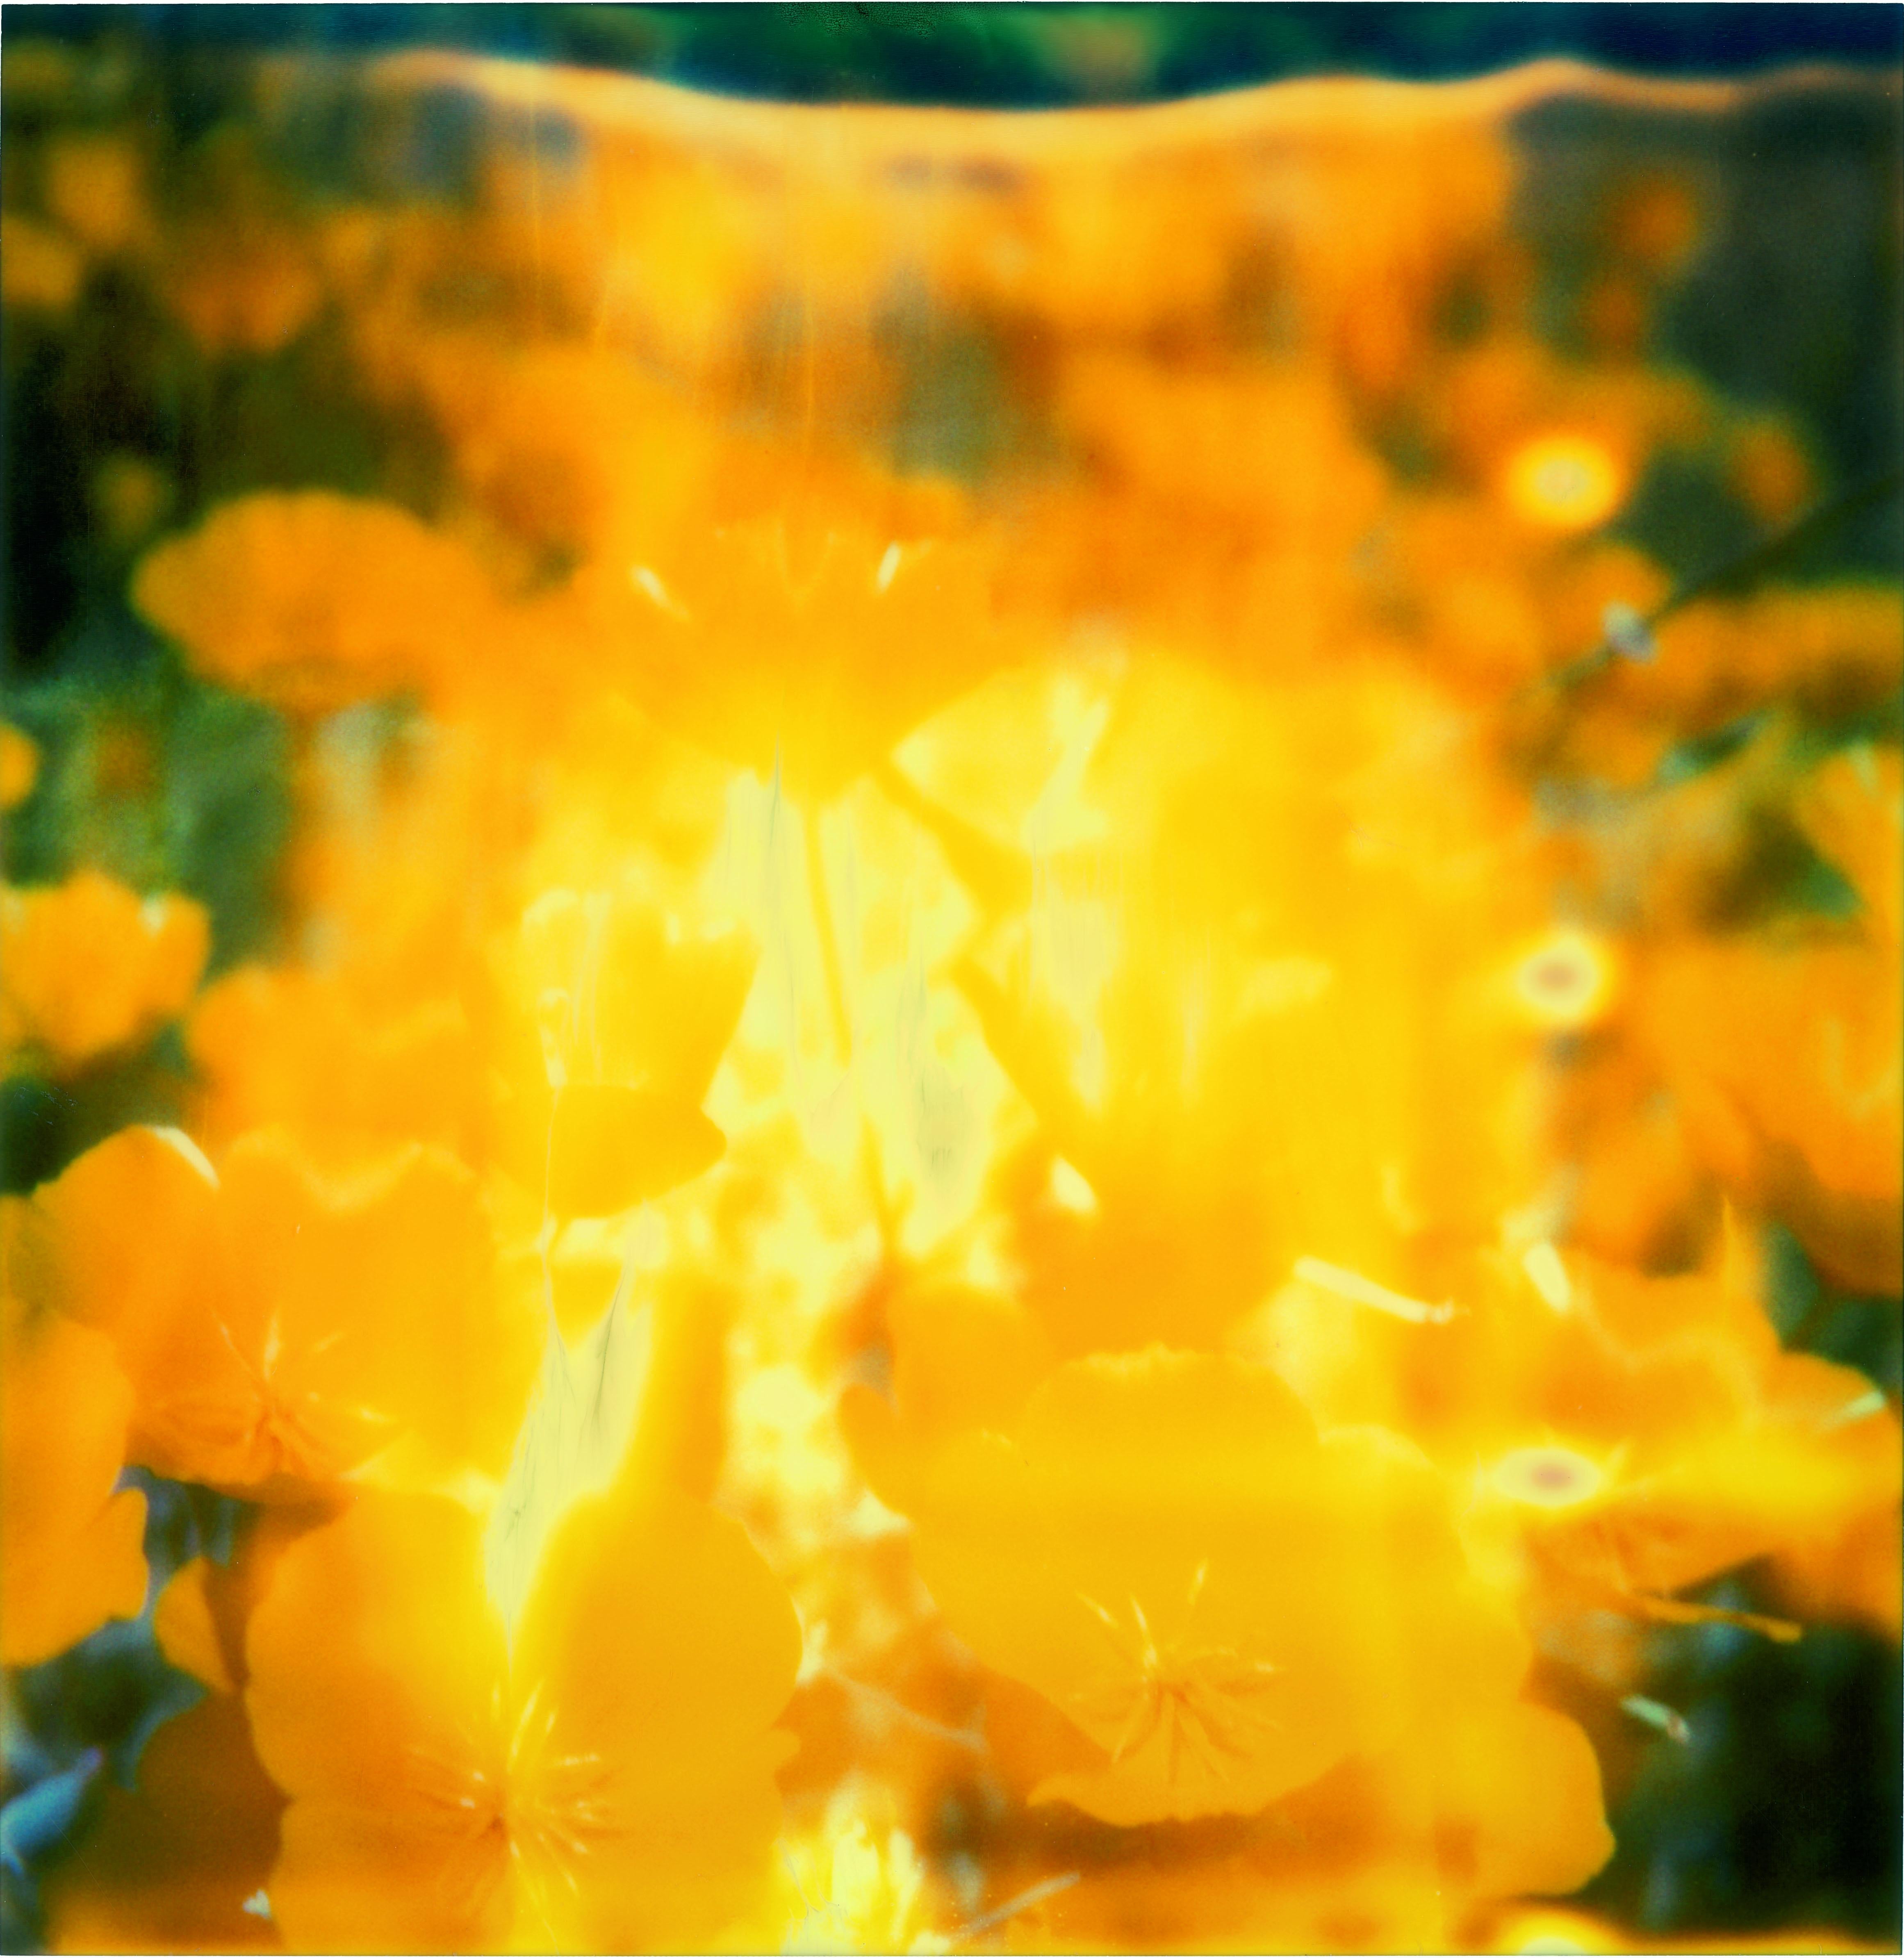 Stefanie Schneider Abstract Photograph - Yellow Flower  - The Last Picture Show, analog, 128x126cm, not mounted